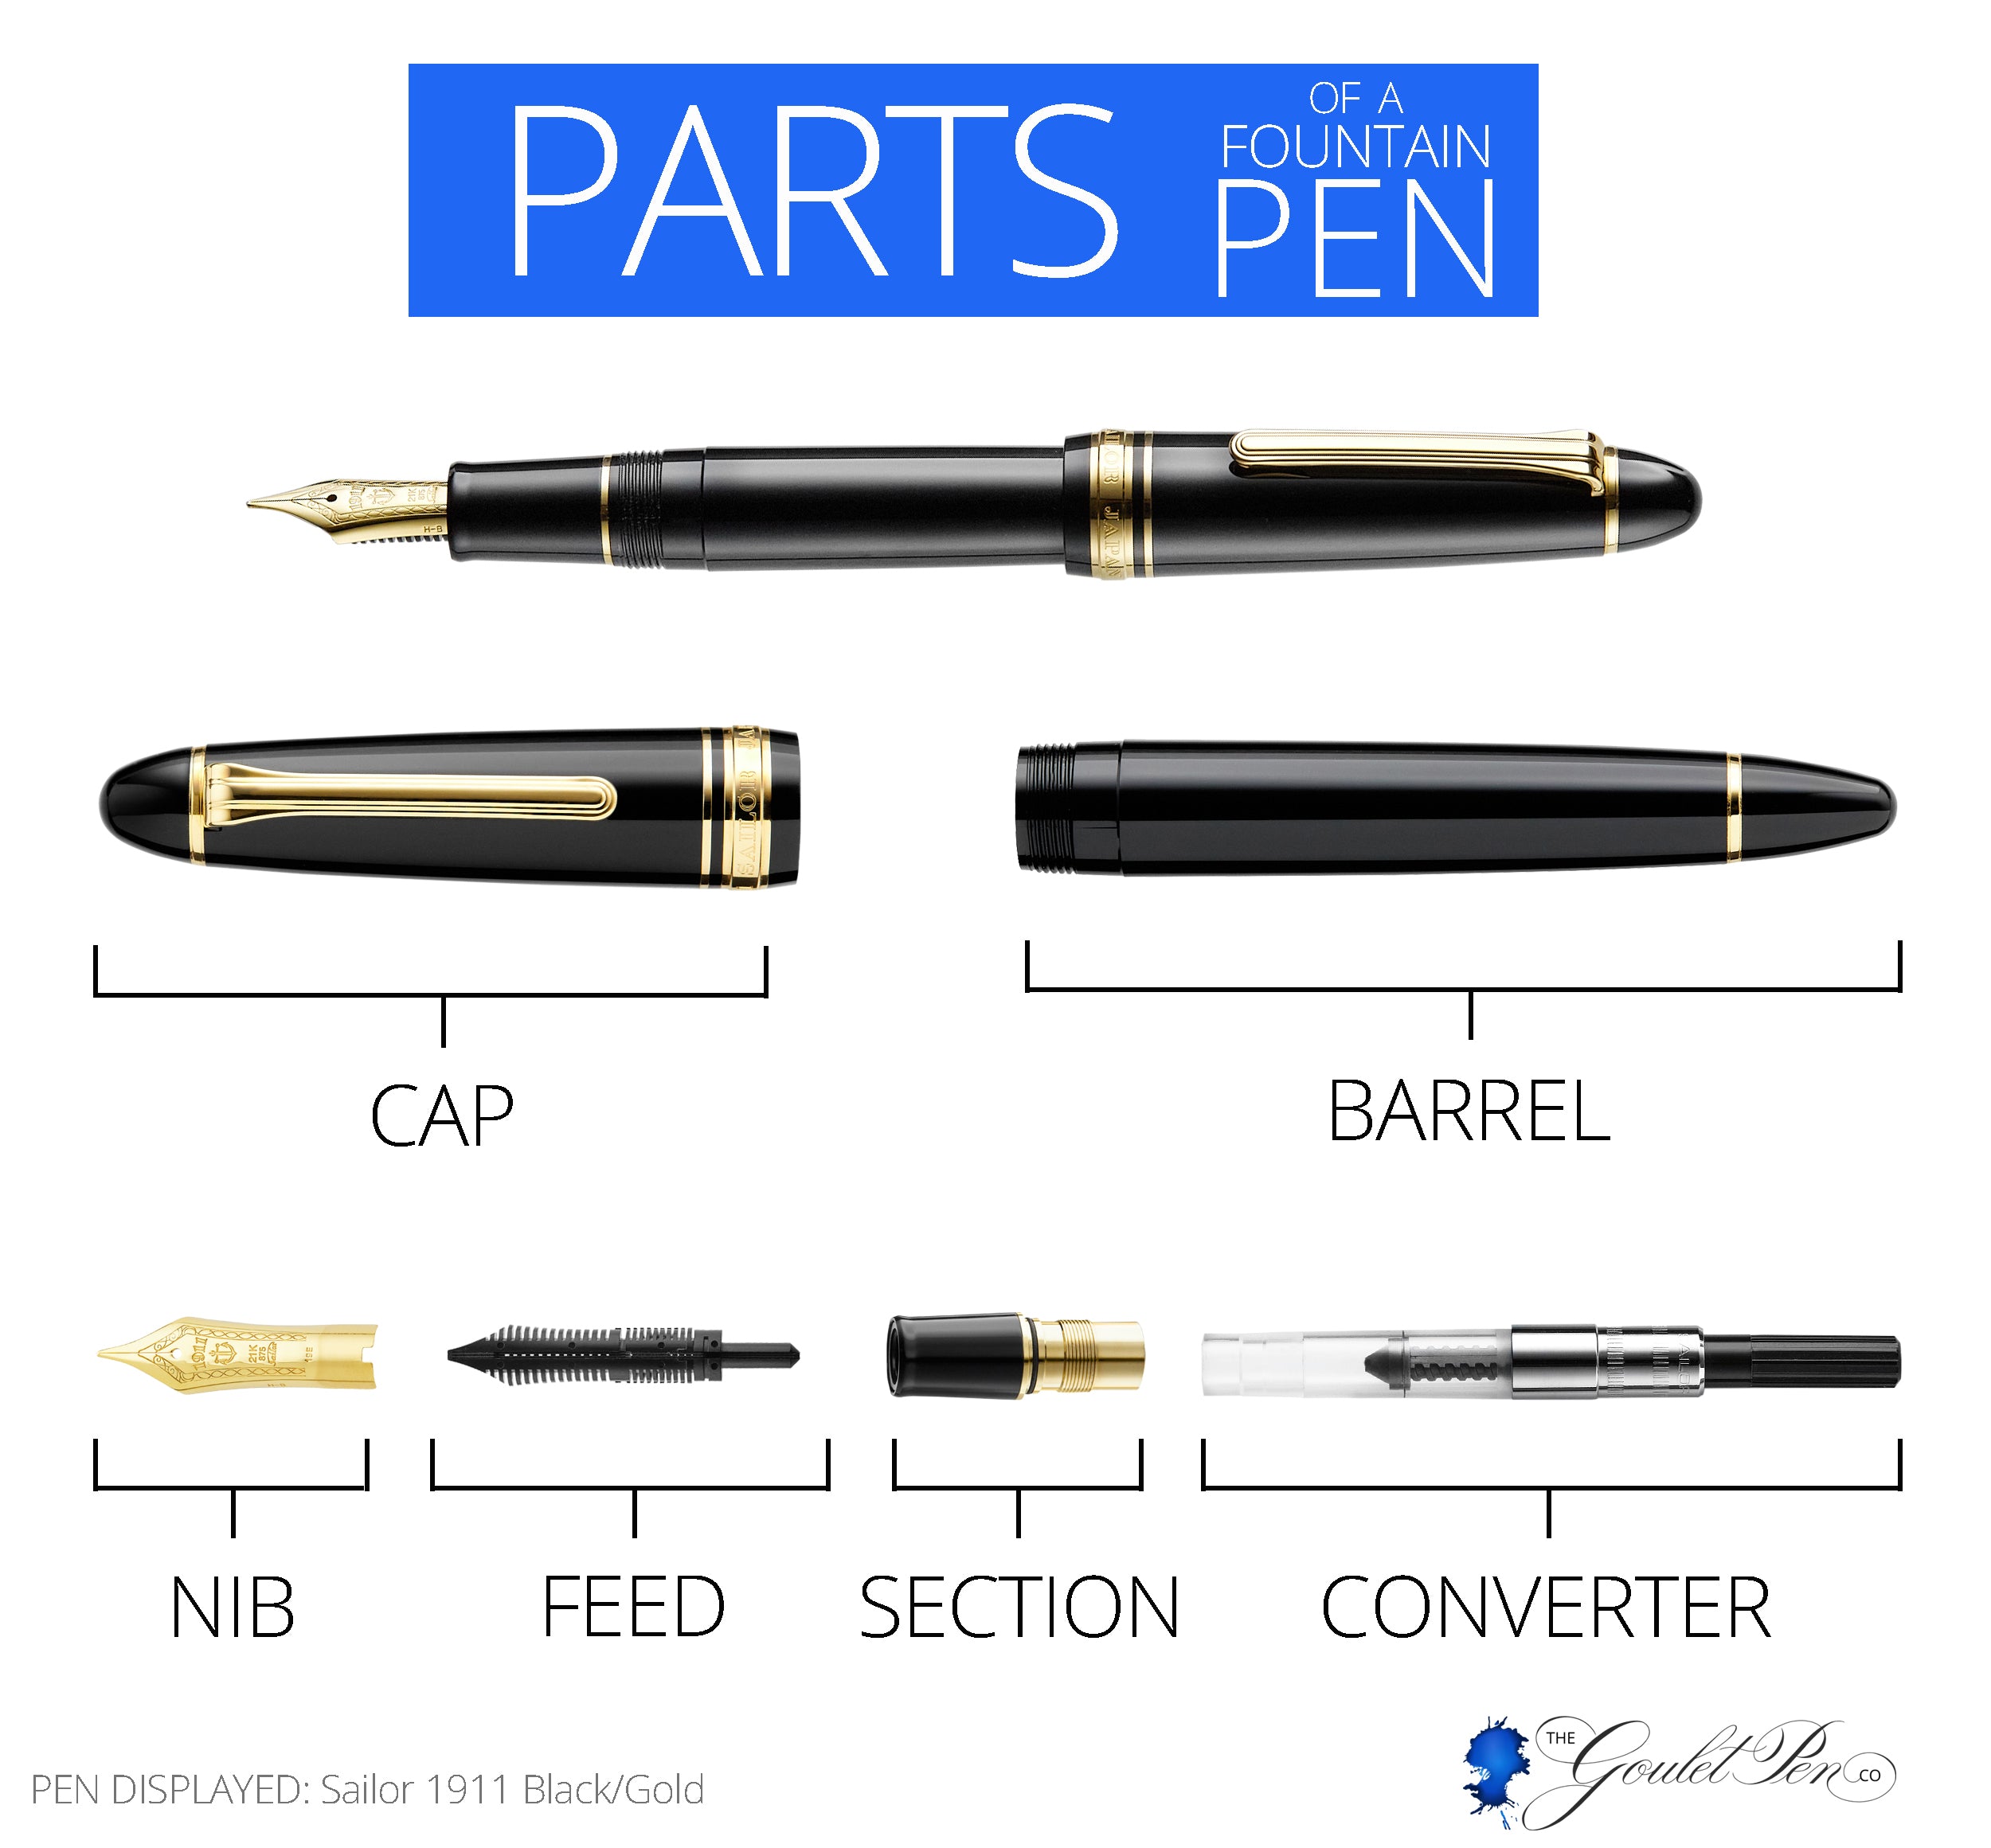 Infographic labeling parts of a fountain pen